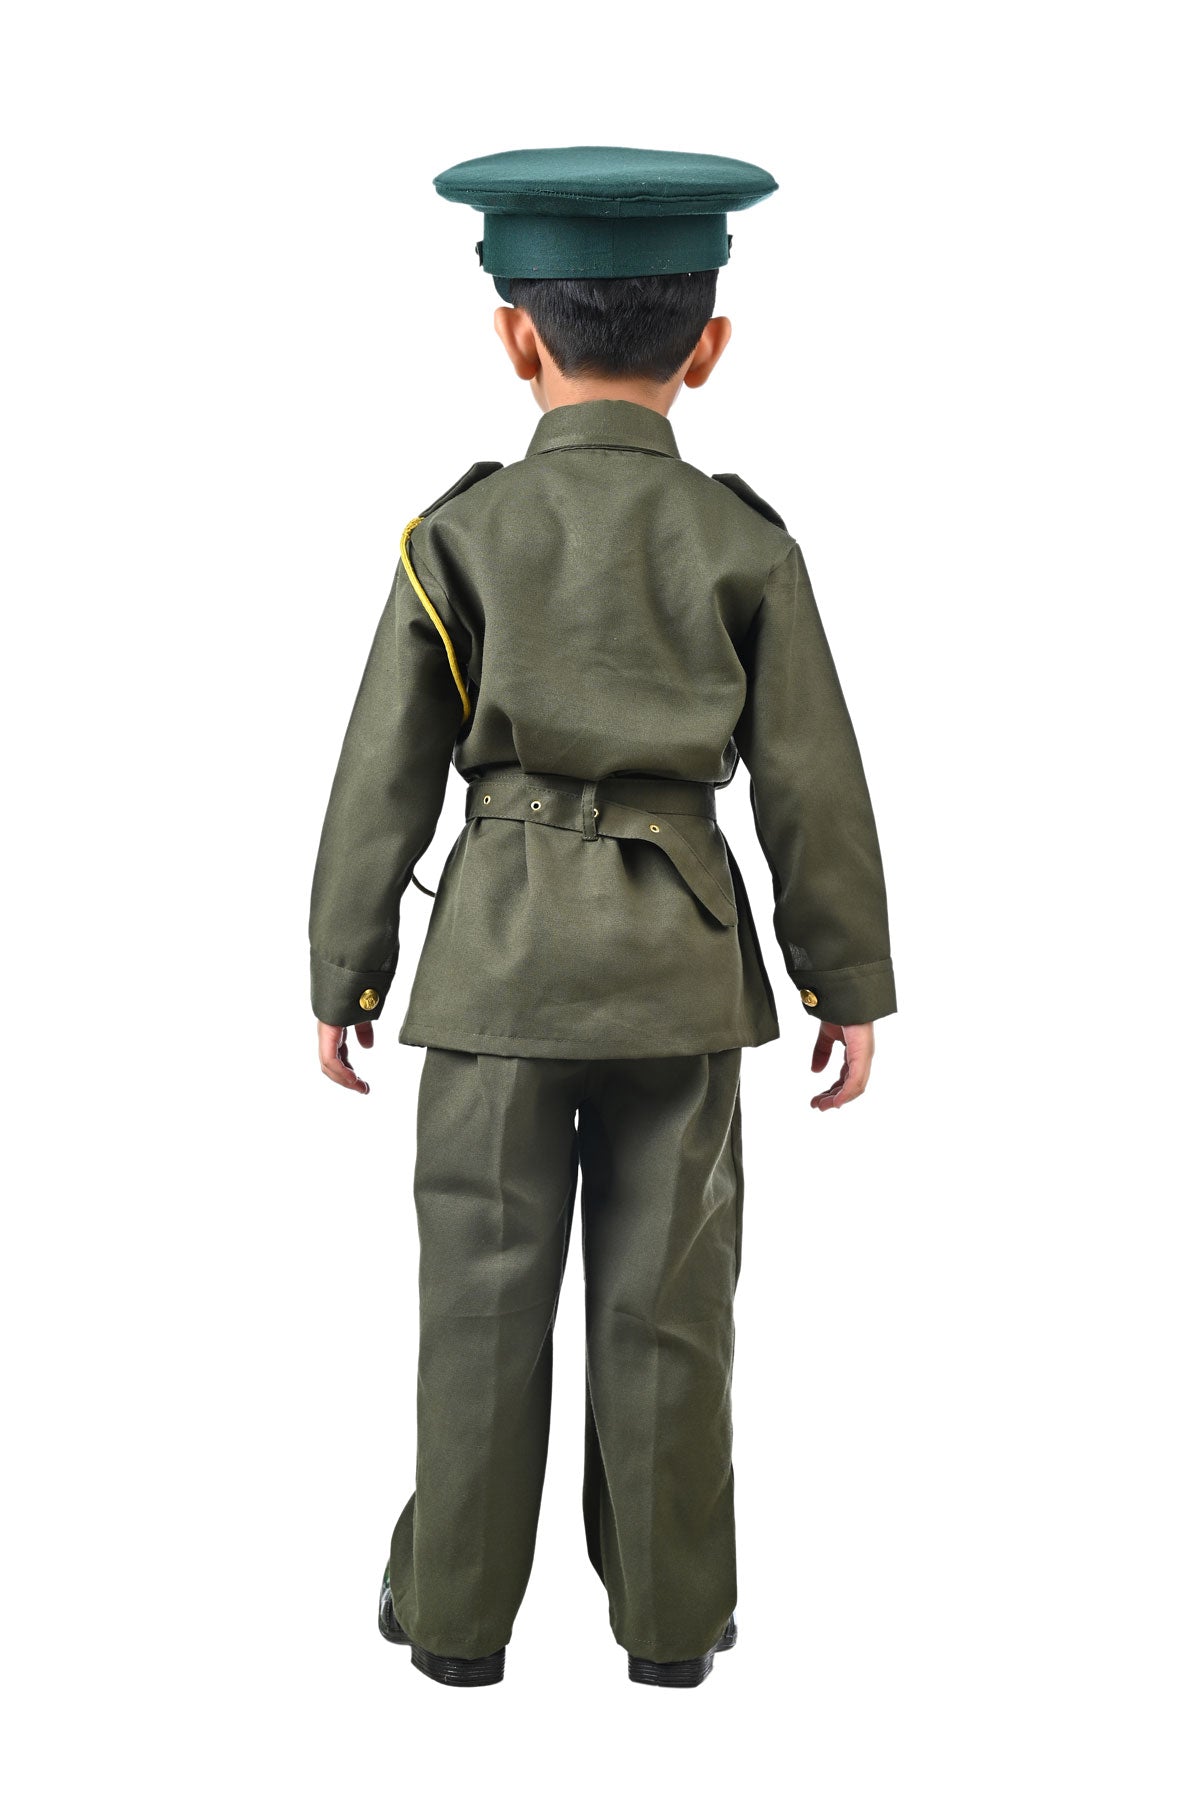 Army Officer Costume for Kids | Uniform Costumes for Boys